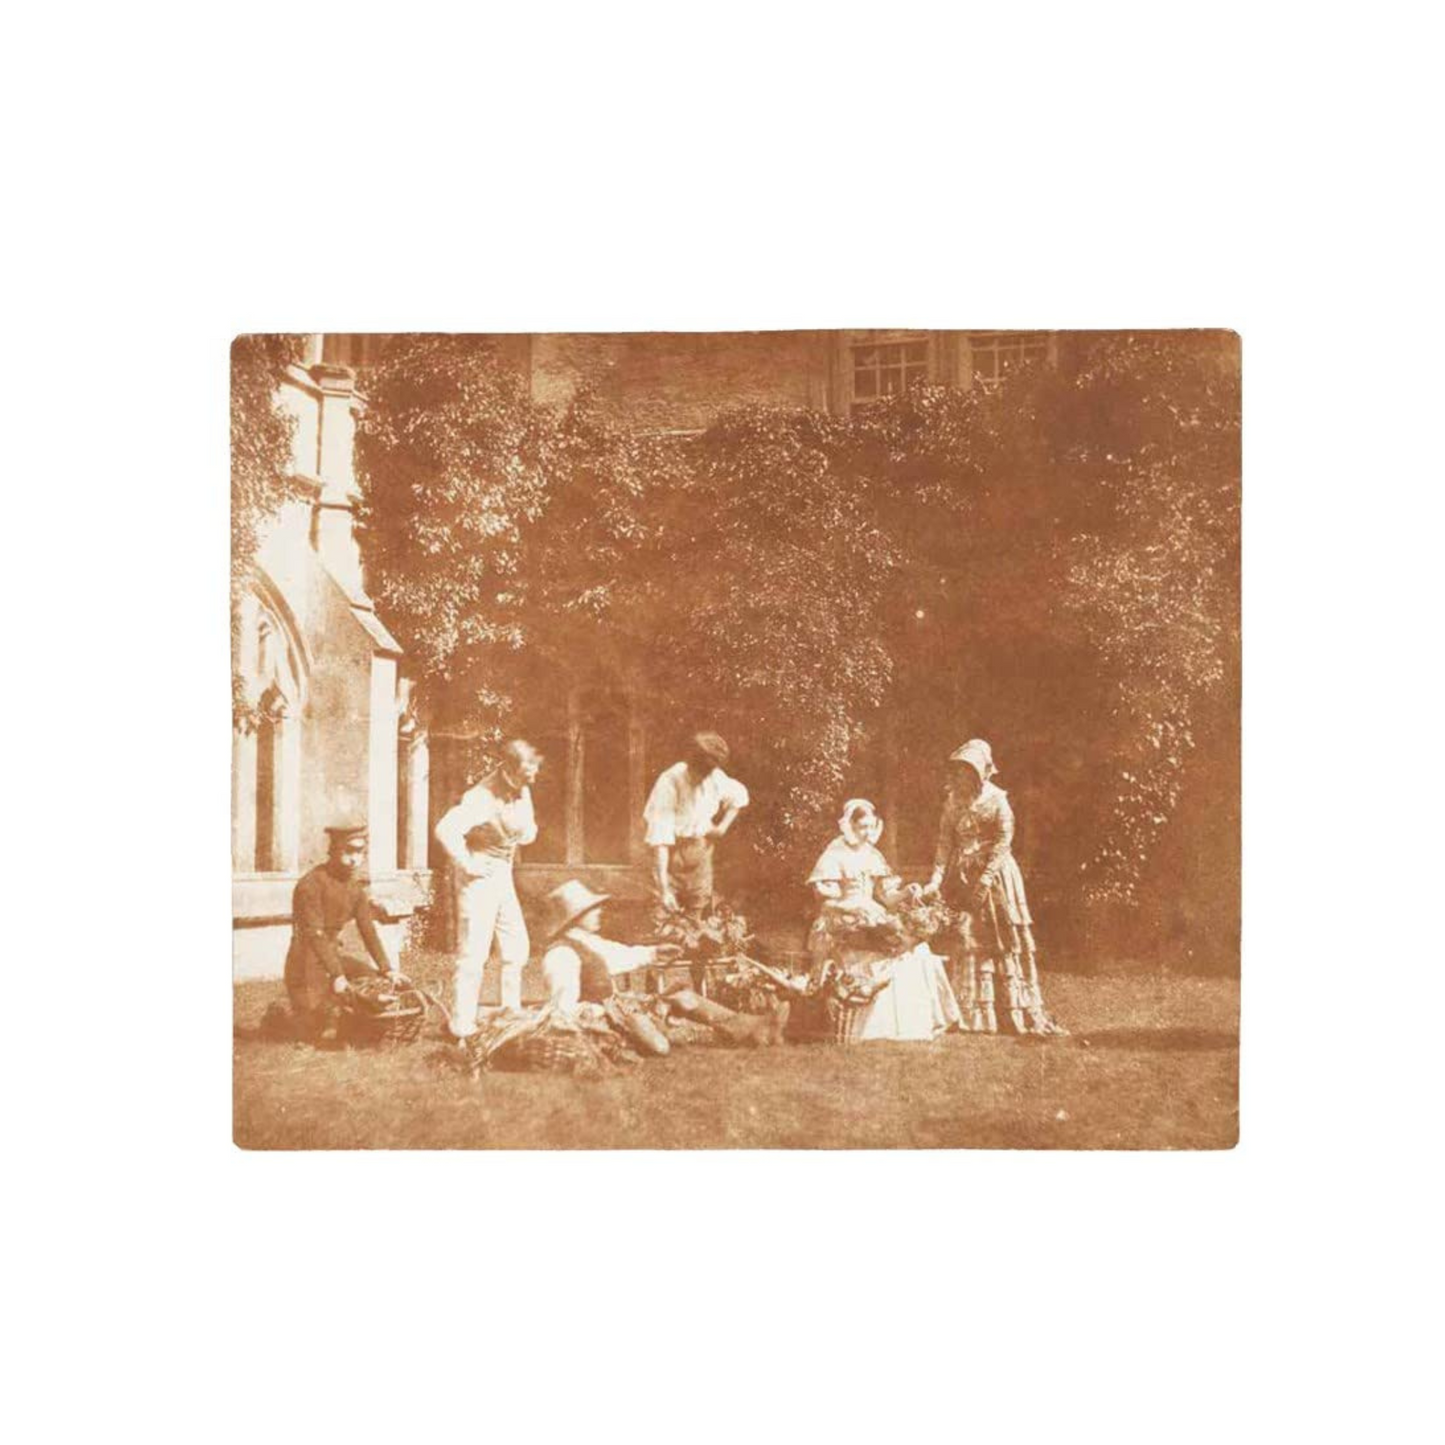 Inventing Photography, William Henry Fox Talbot